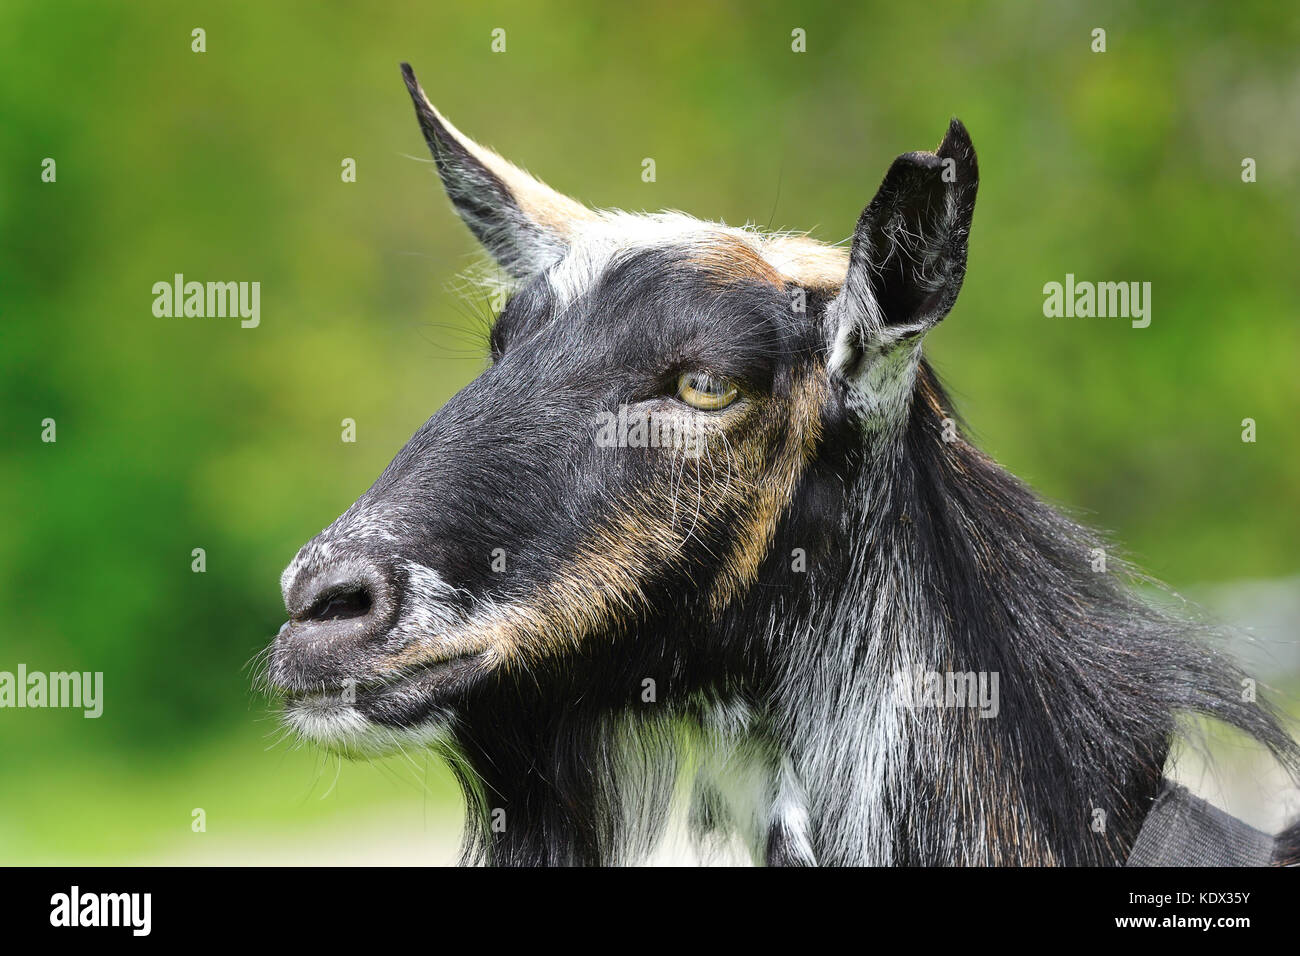 goat head closeup over green out of focus background Stock Photo